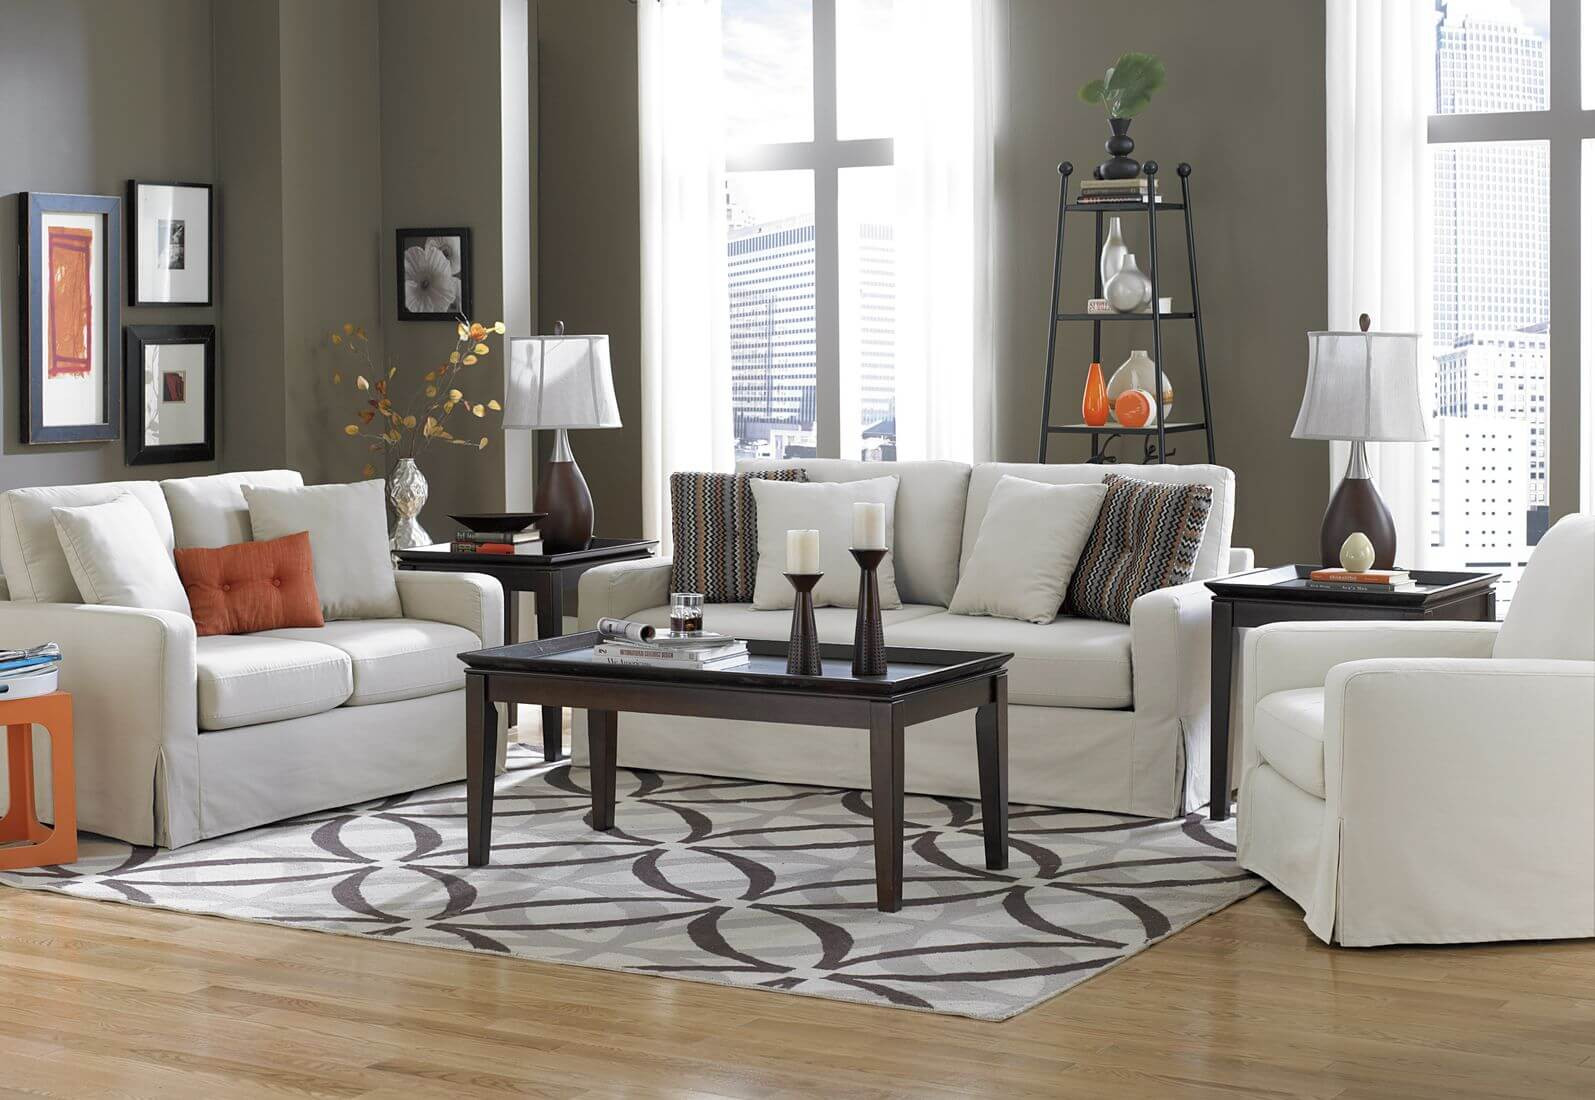 Living Room Floor Rugs
 40 Living Rooms with Area Rugs for Warmth & Richness